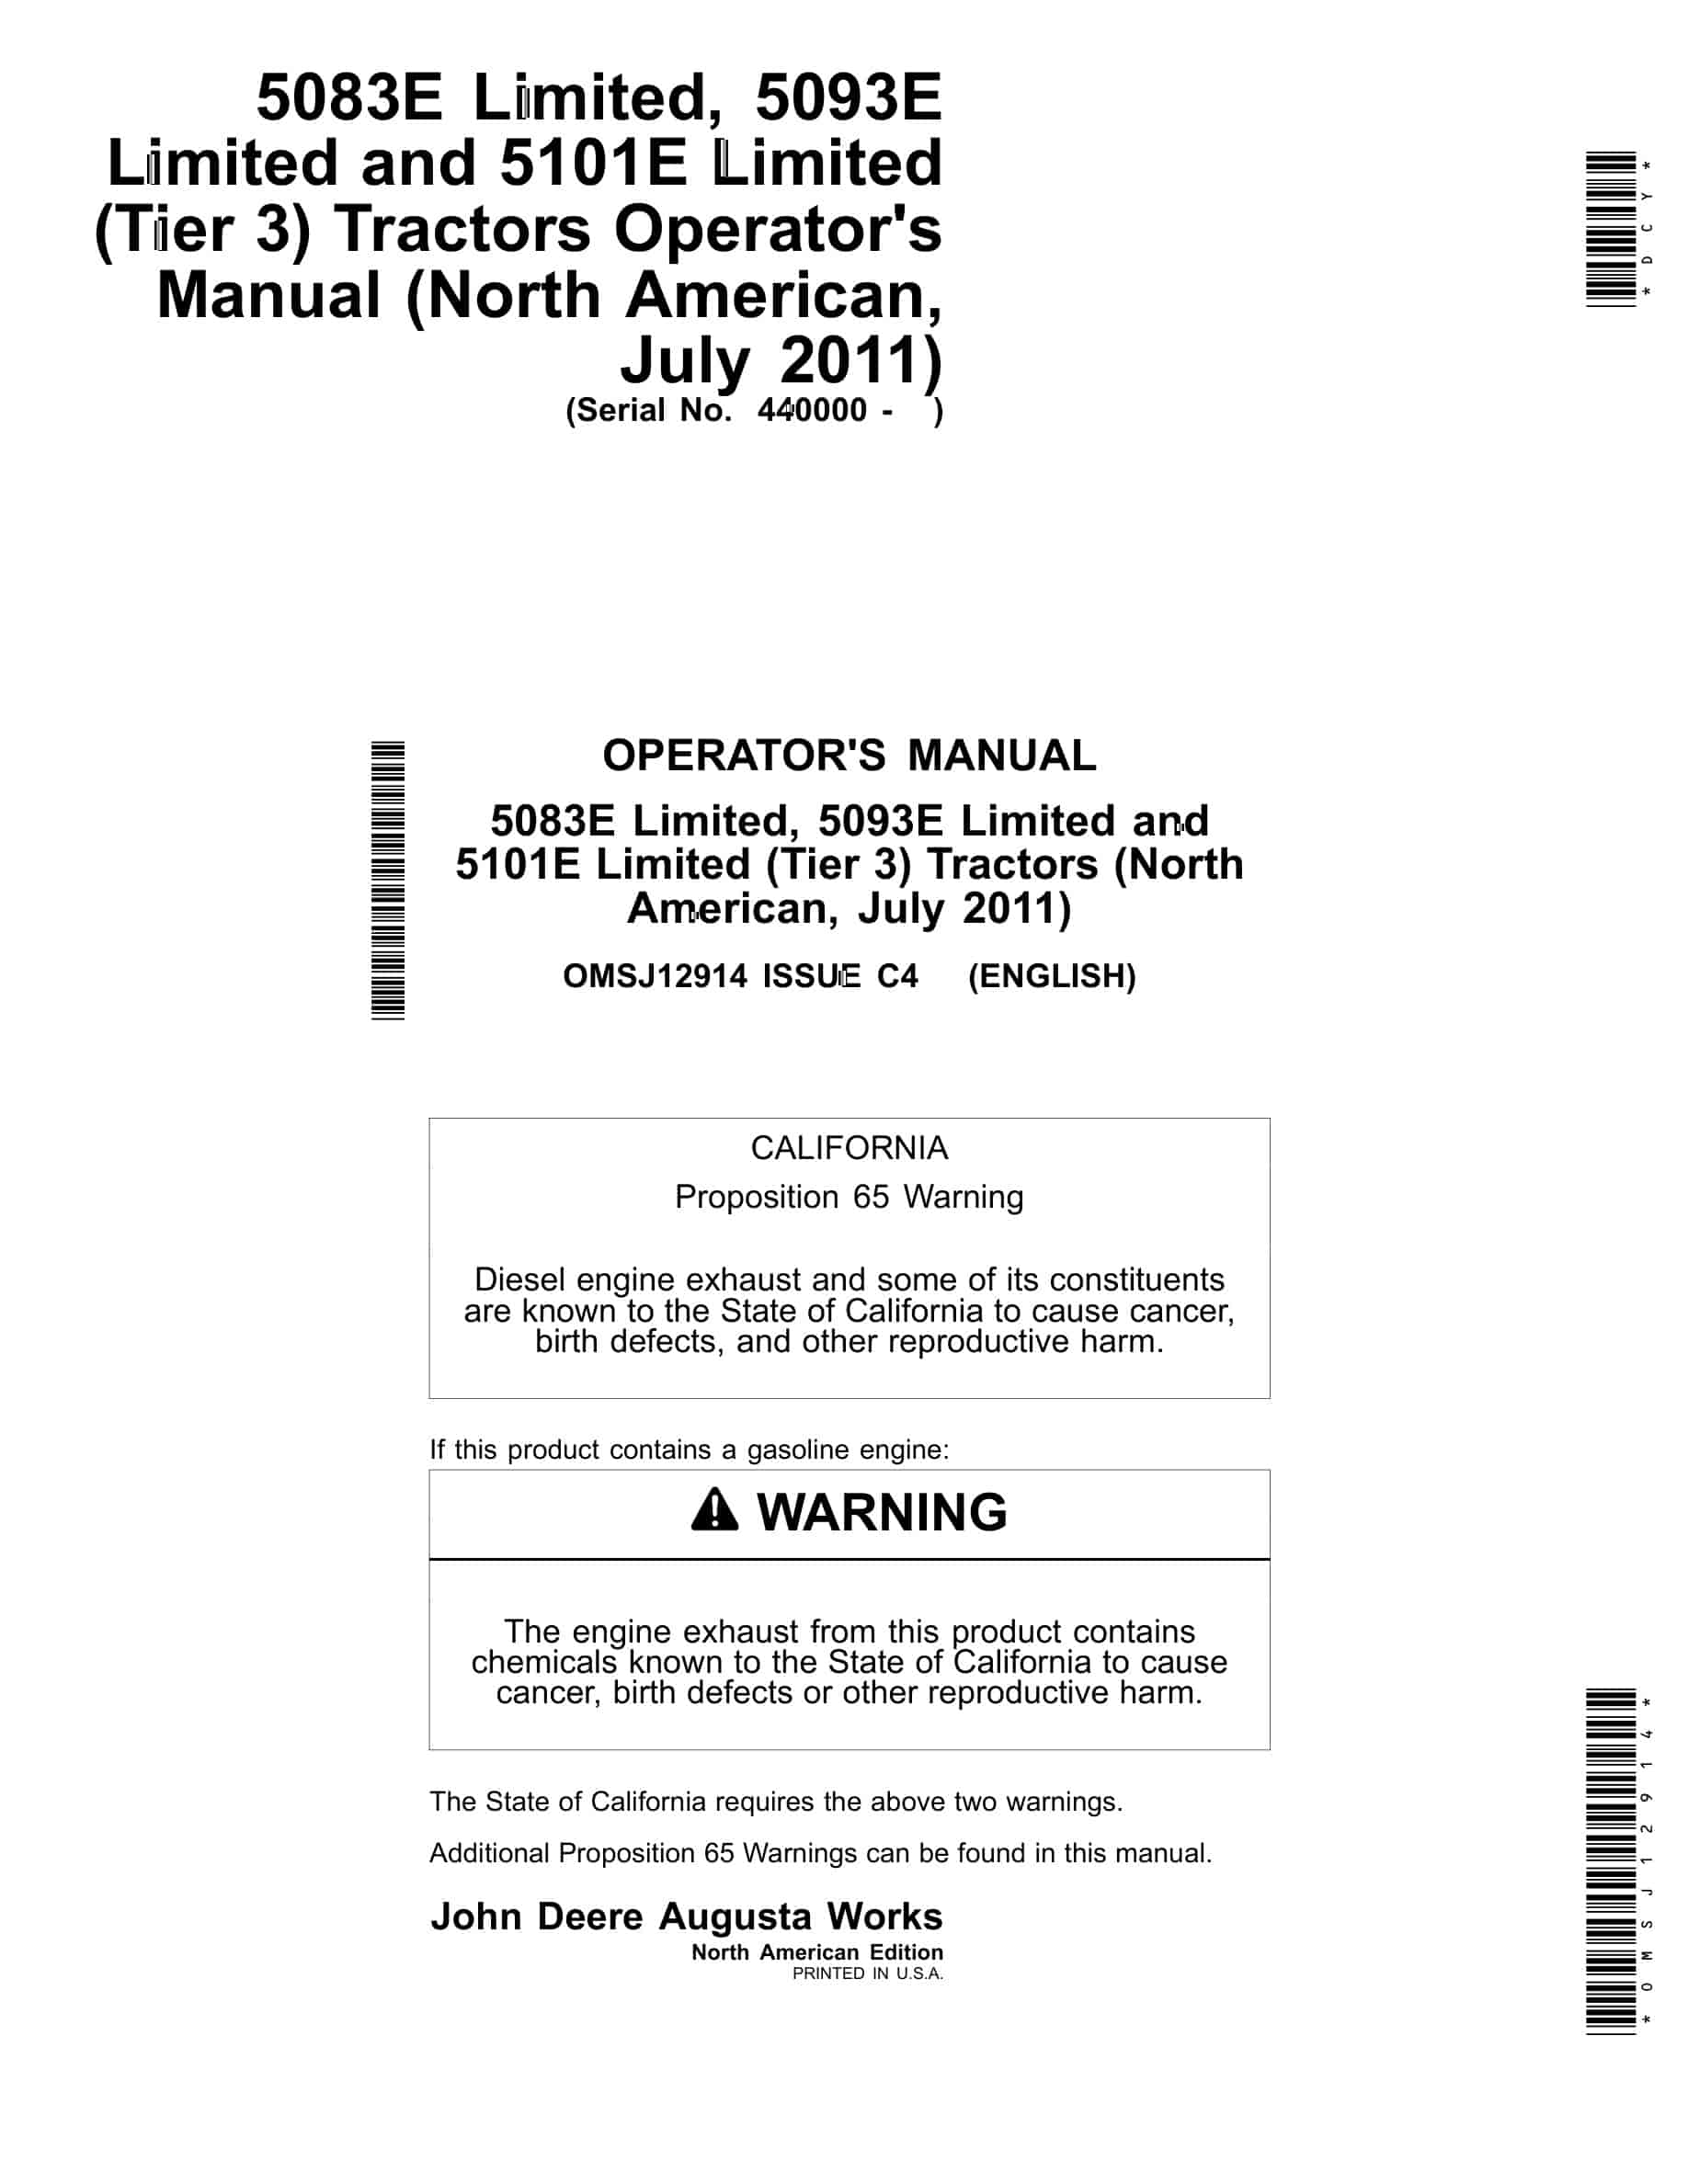 John Deere 5083E Limited, 5093E Limited and 5101E Limited (Tier 3) Tractor Operator Manual OMSJ12914-1